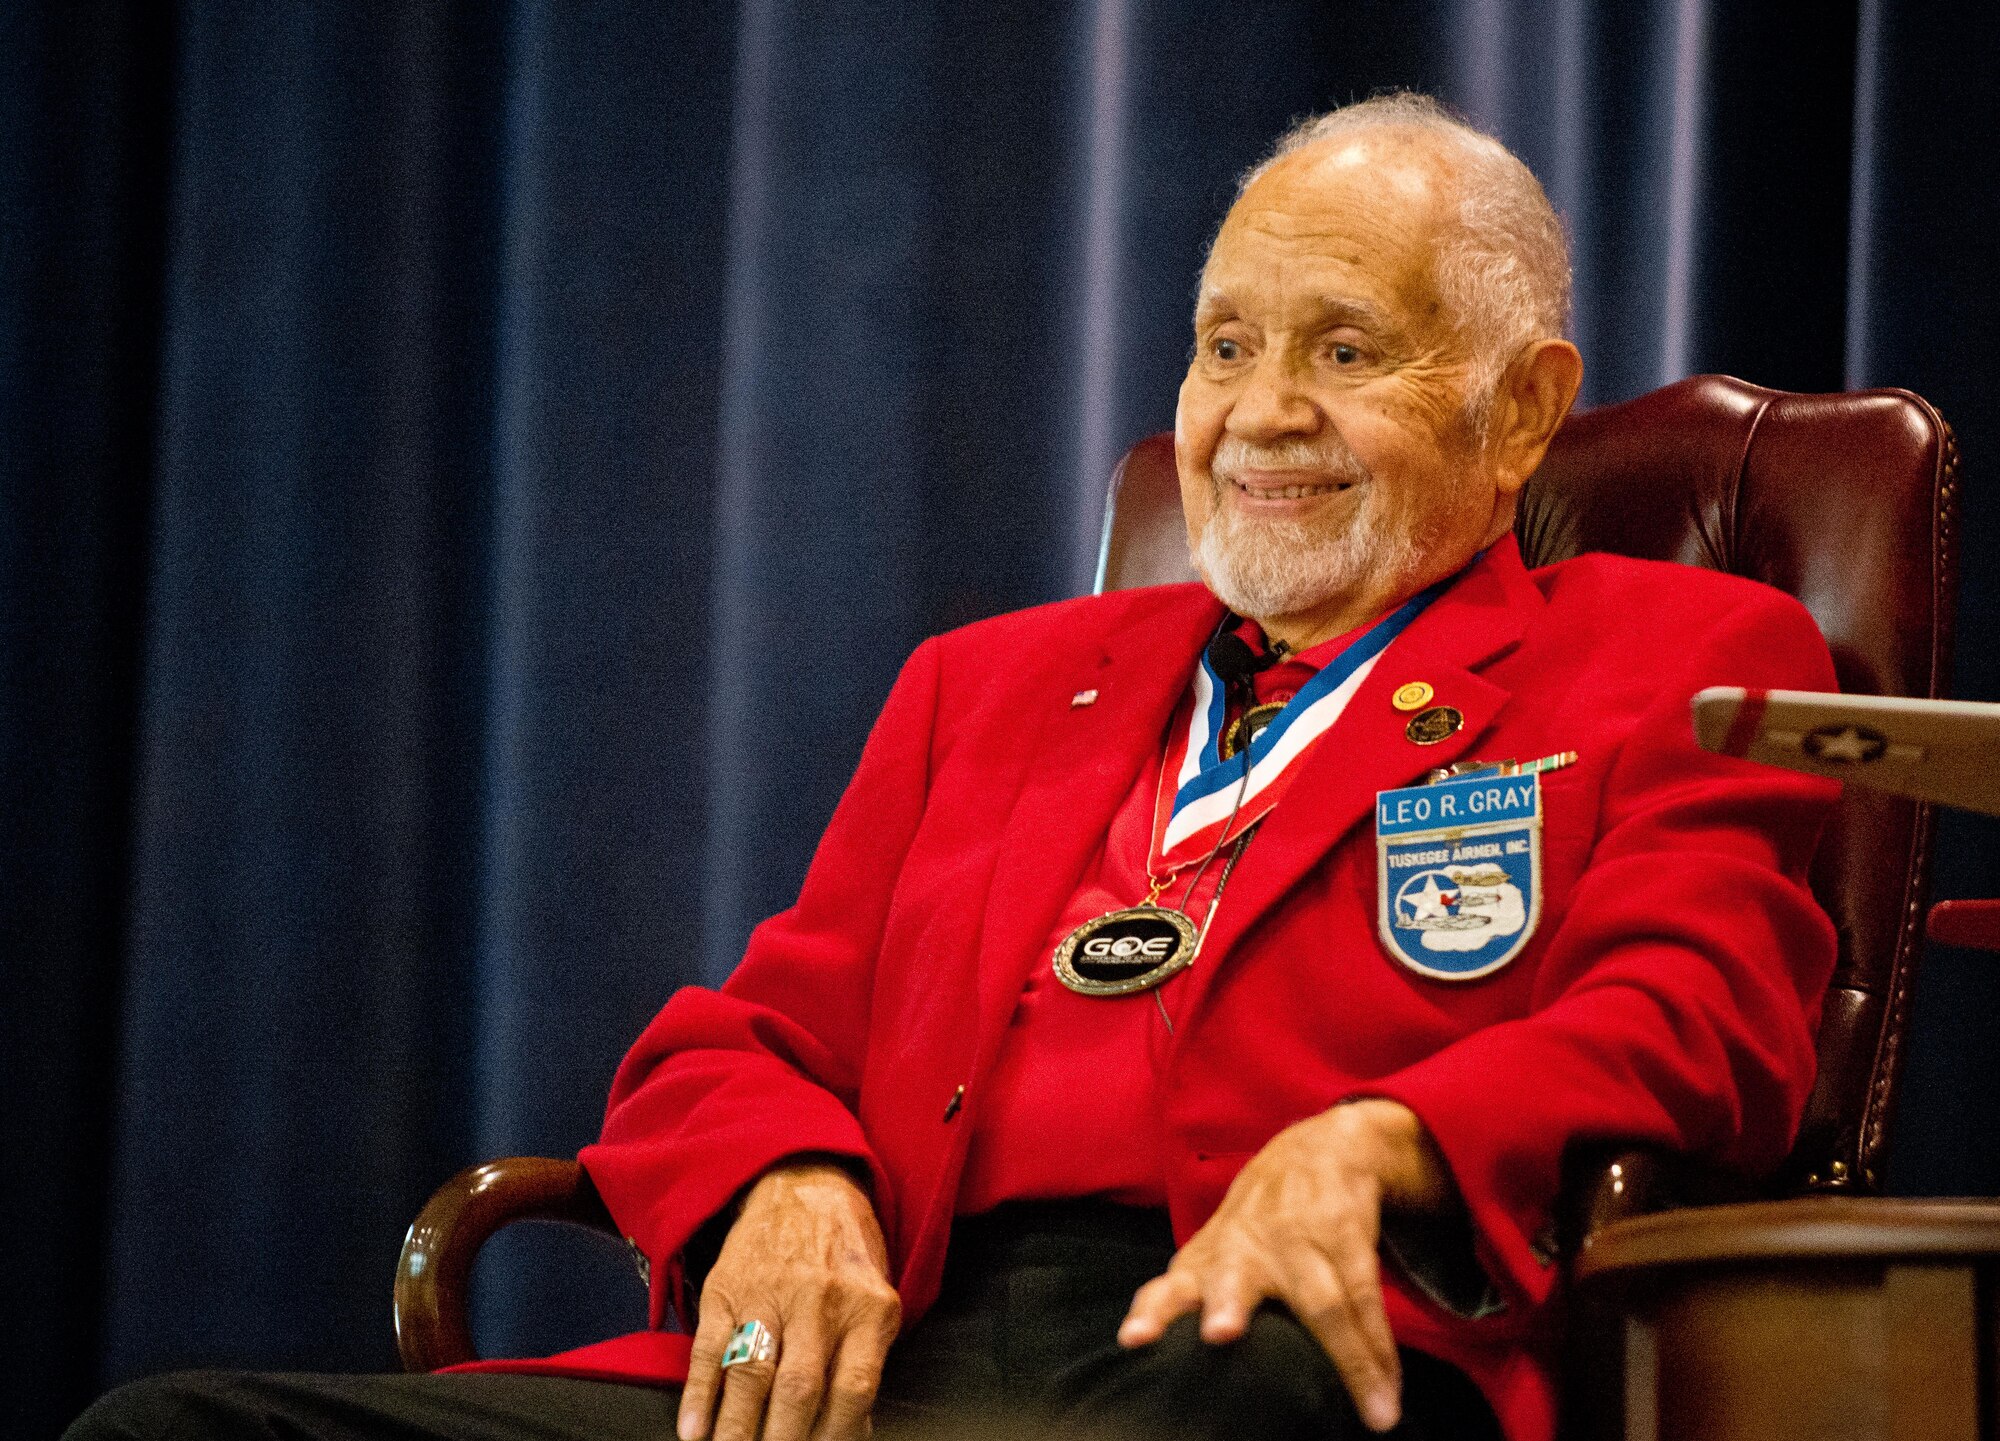 Retired Lt. Col. Leo Gray, 2016 Gathering of Eagles honoree, shares his experiences as a pilot of the 332nd Fighter Group, the first all African-American flying unit, during the Air Command and Staff College’s 2016 Gathering of Eagles event, May 31, 2016, Maxwell Air Force Base, Ala.He completed 15 combat missions over German-occupied territory and logged in 750 flying hours.(U.S. Air Force photo/ Donna Burnett)